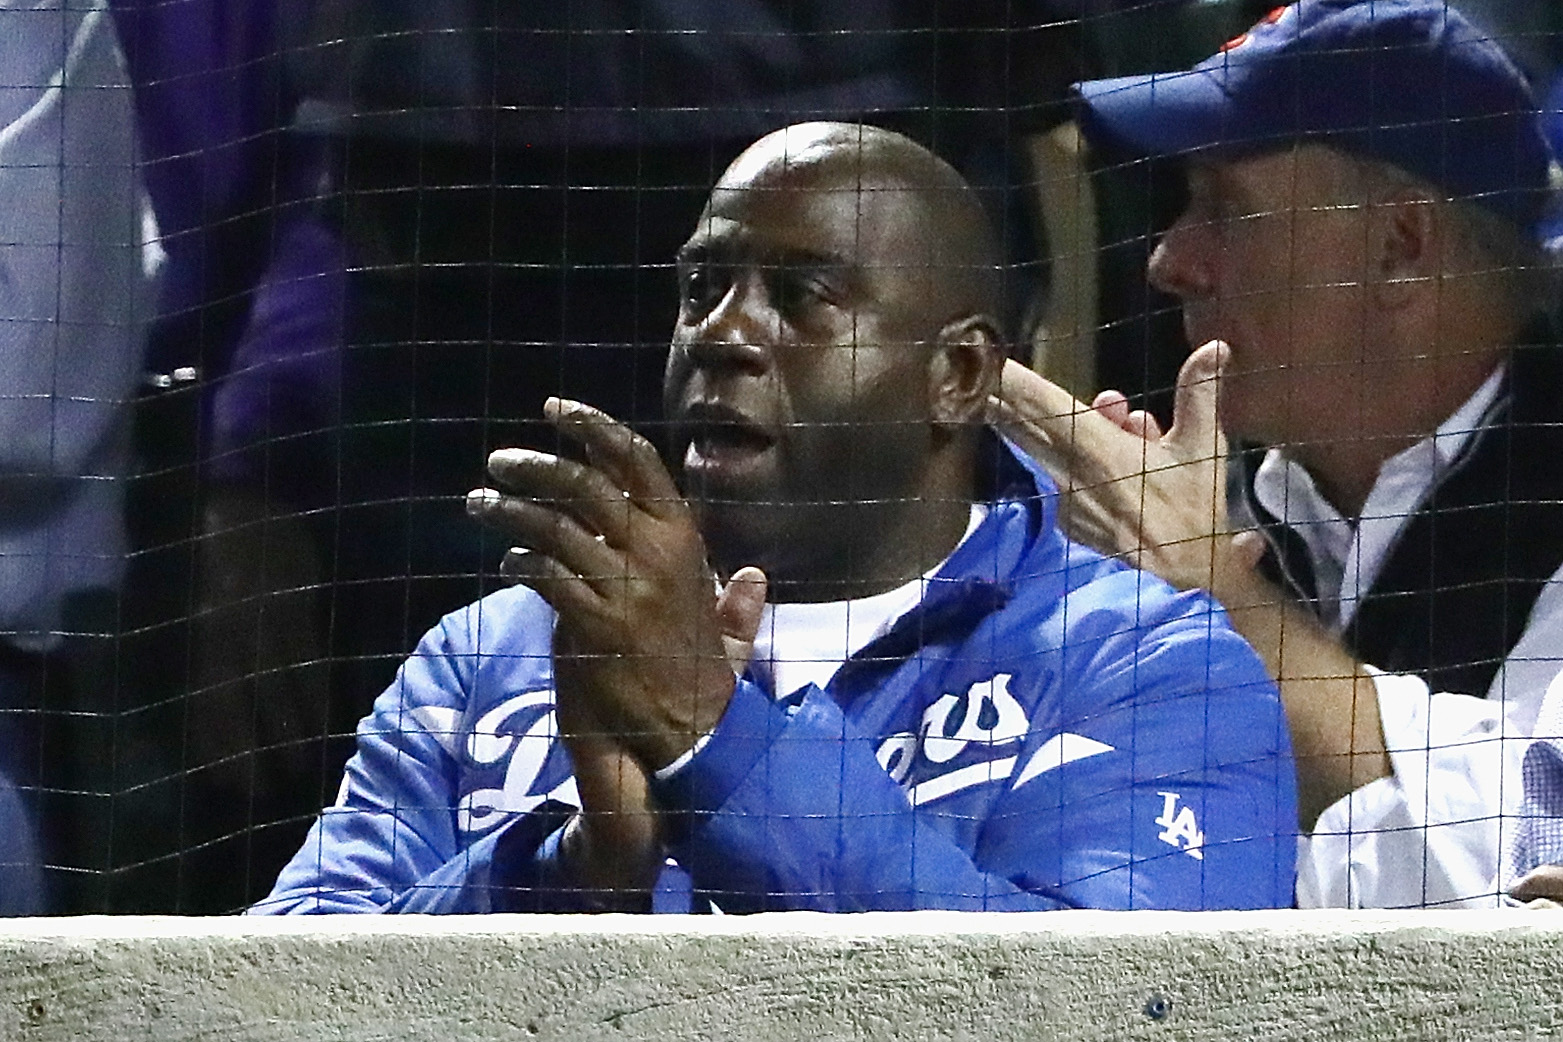 CHICAGO, IL - OCTOBER 15: Earvin 'Magic' Johnson attends game one of the National League Championship Series between the Chicago Cubs and the Los Angeles Dodgers at Wrigley Field on October 15, 2016 in Chicago, Illinois. Jonathan Daniel/Getty Images/AFP